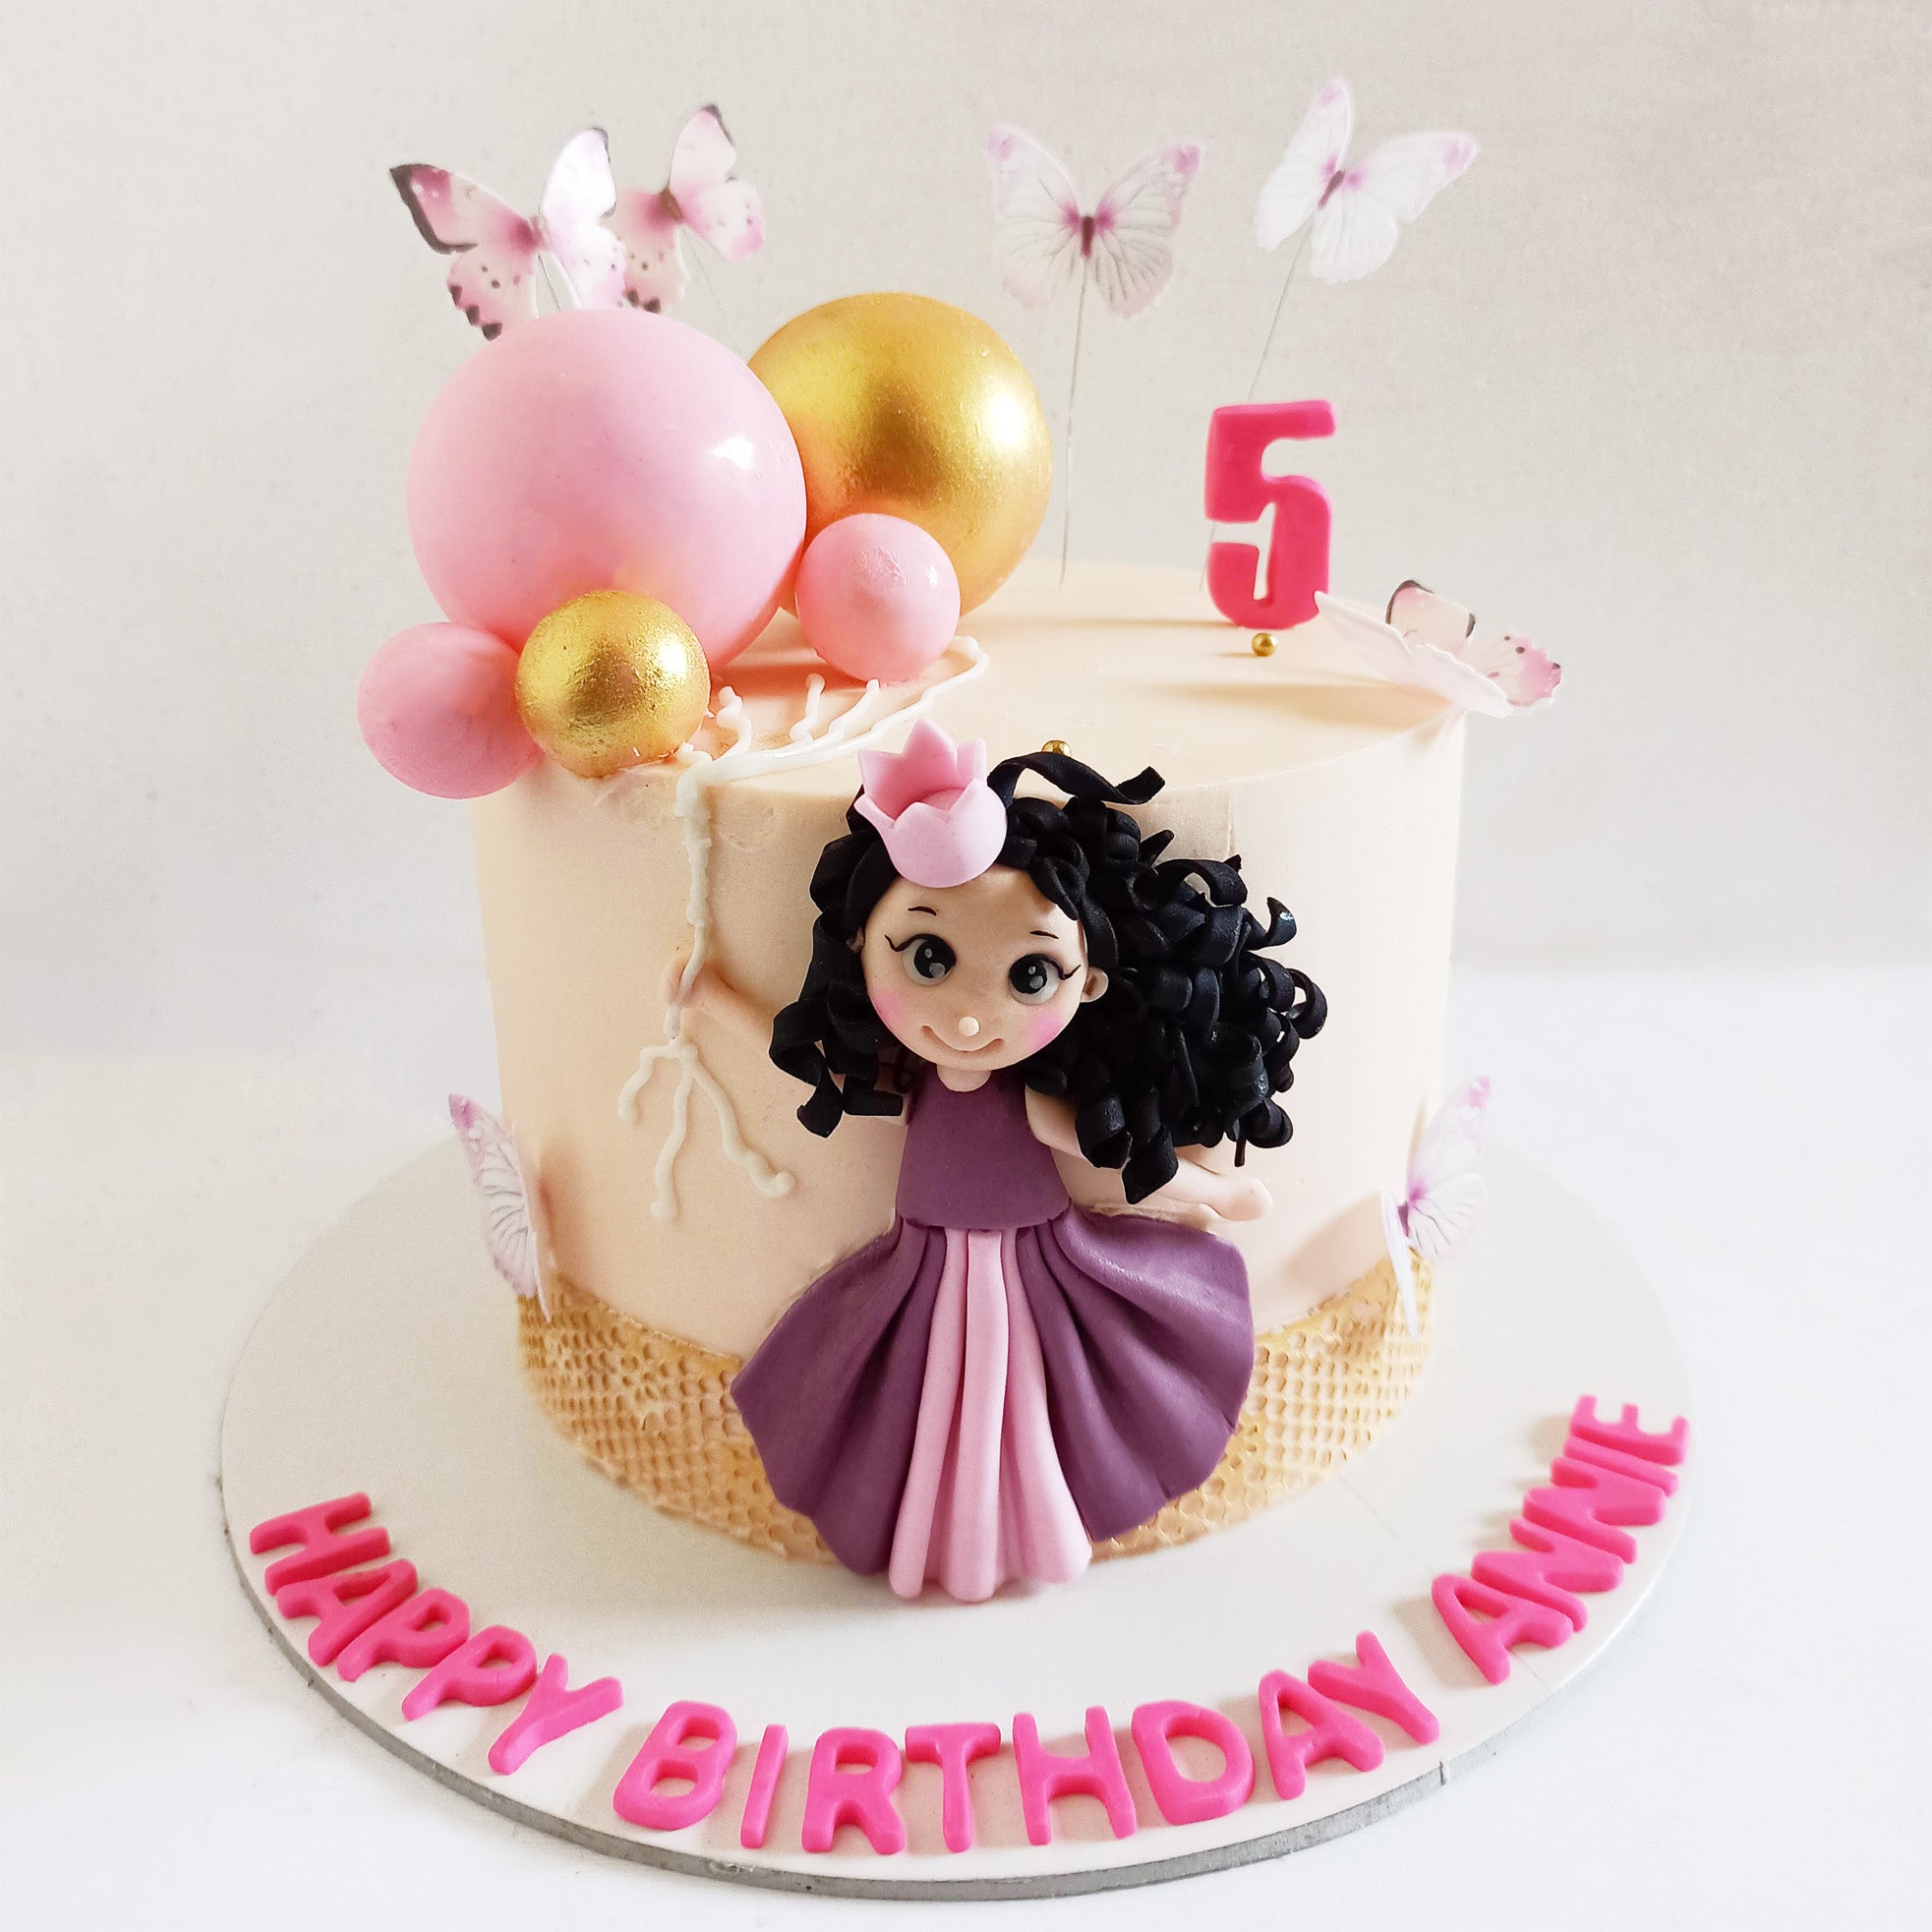 Cakes, Cookies, Breads - The Kneaded Cupboard | Balloon birthday cakes,  Macaroon cake, Pig birthday cakes